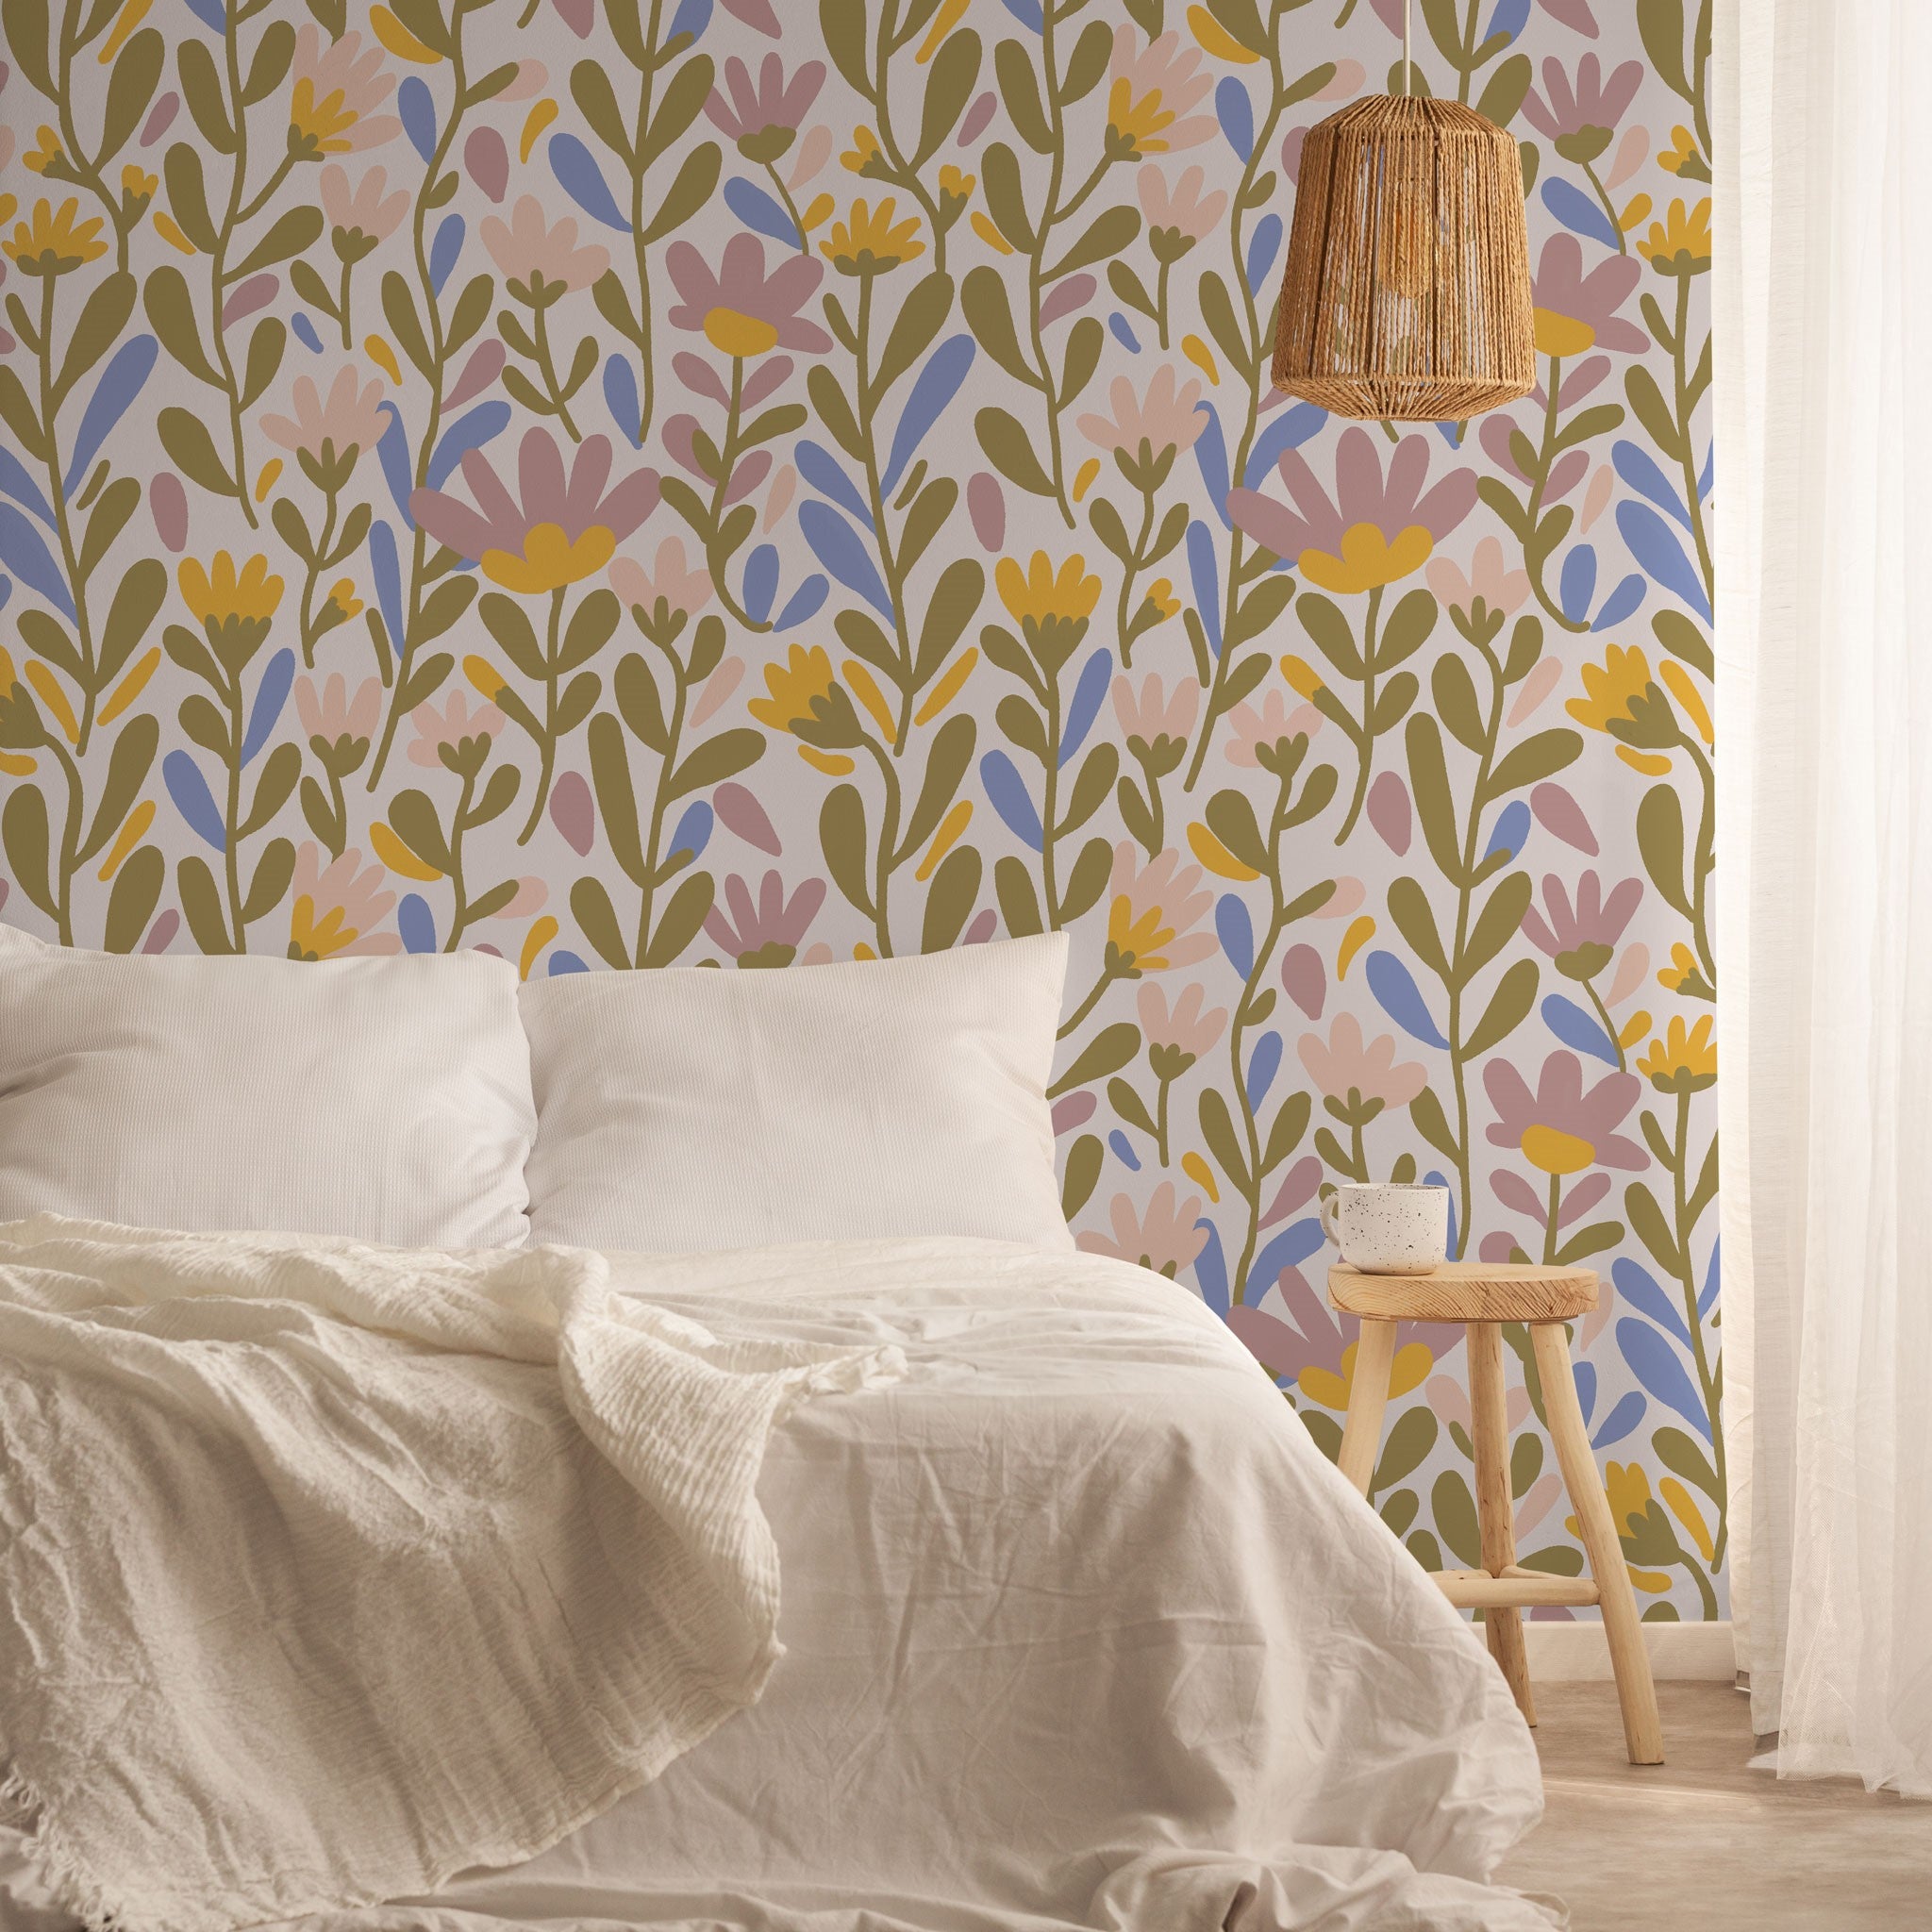 "Wall Blush's Summer Florals Wallpaper featured in cozy bedroom setting, highlighting vibrant pattern and design."